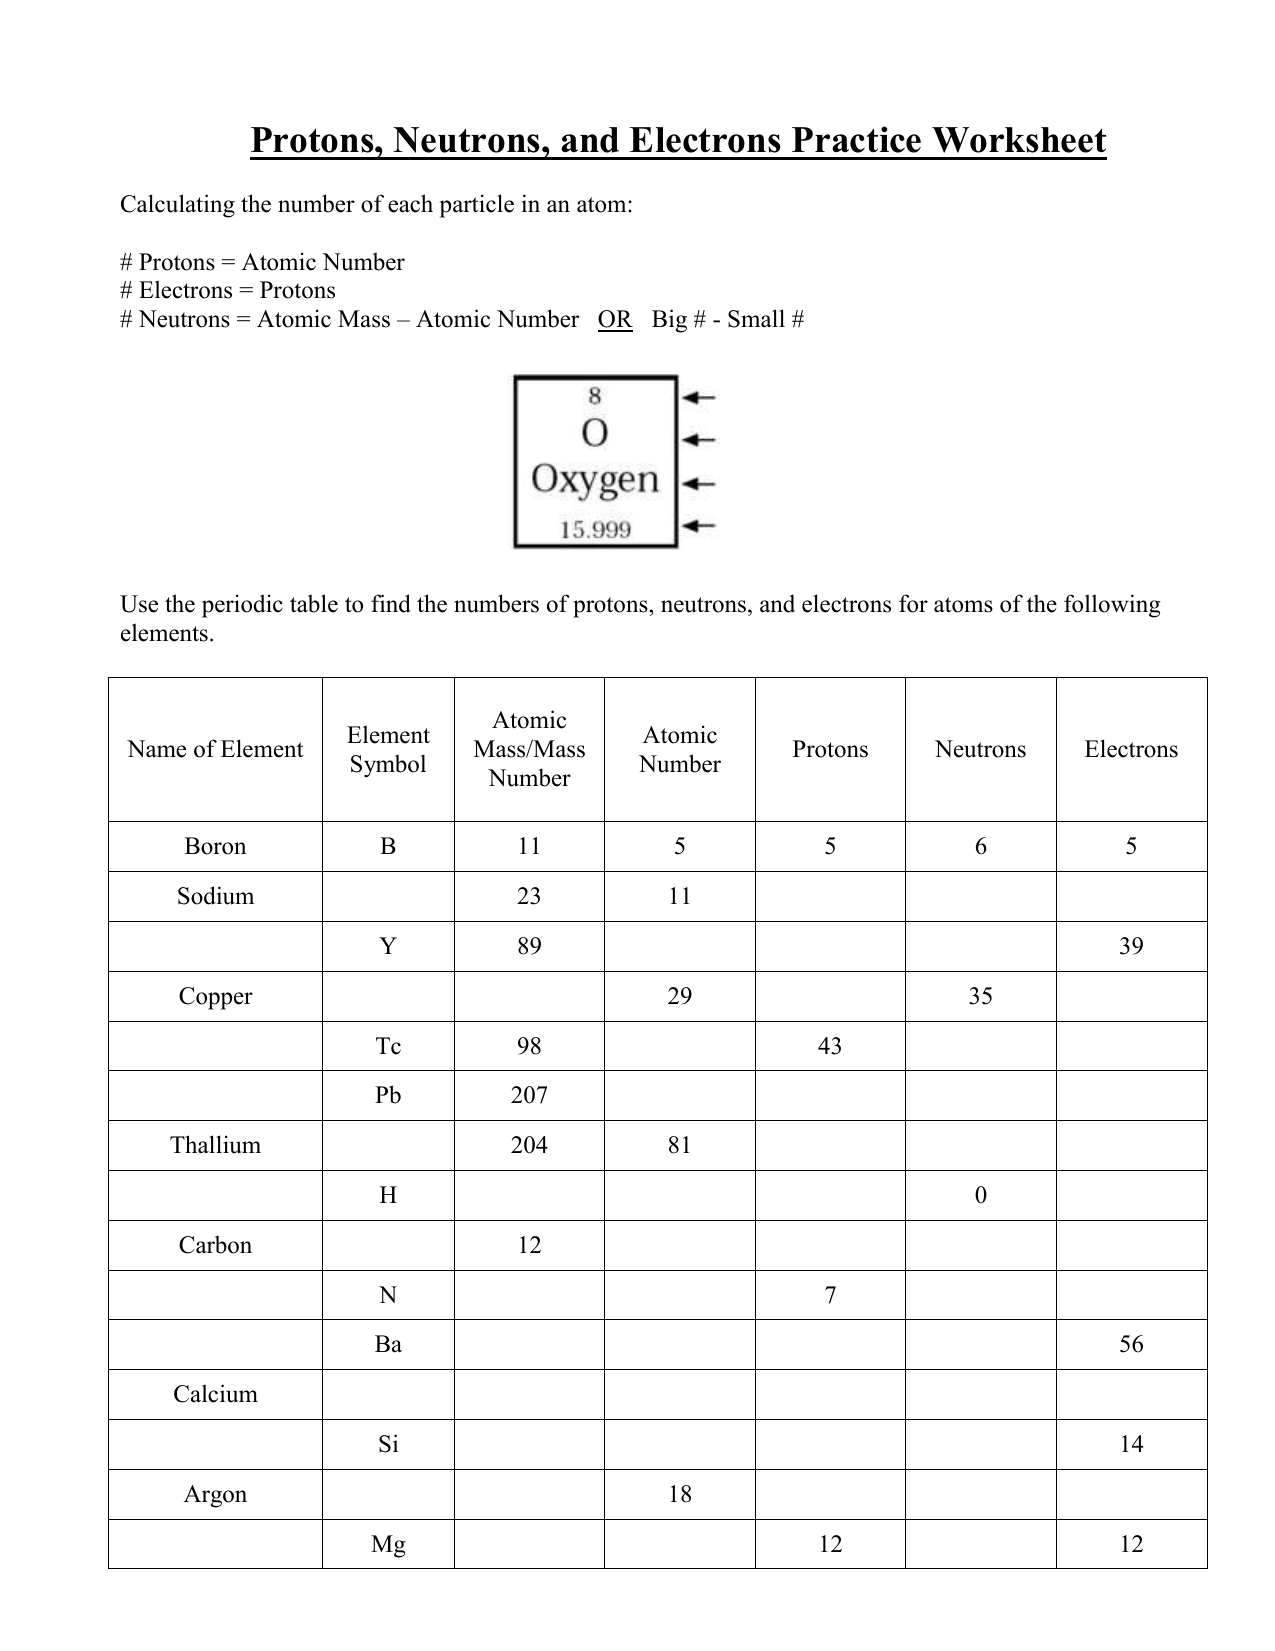 Isotope Calculation Worksheet Answers